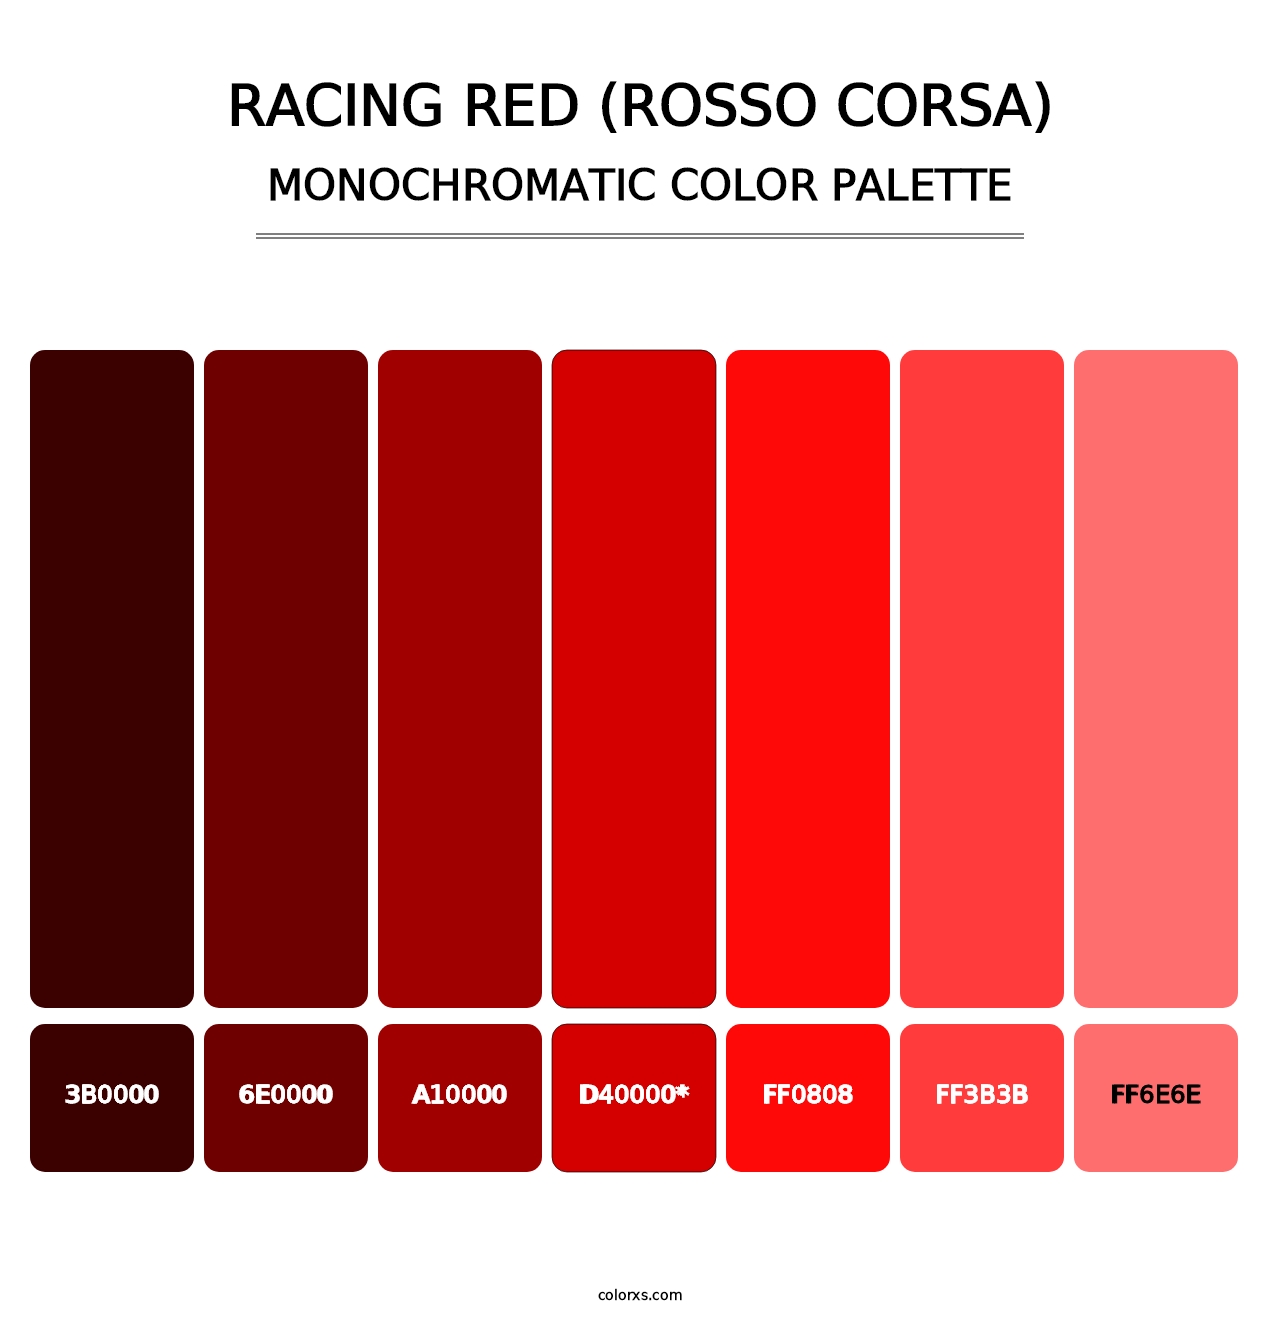 Racing Red (Rosso Corsa) - Monochromatic Color Palette